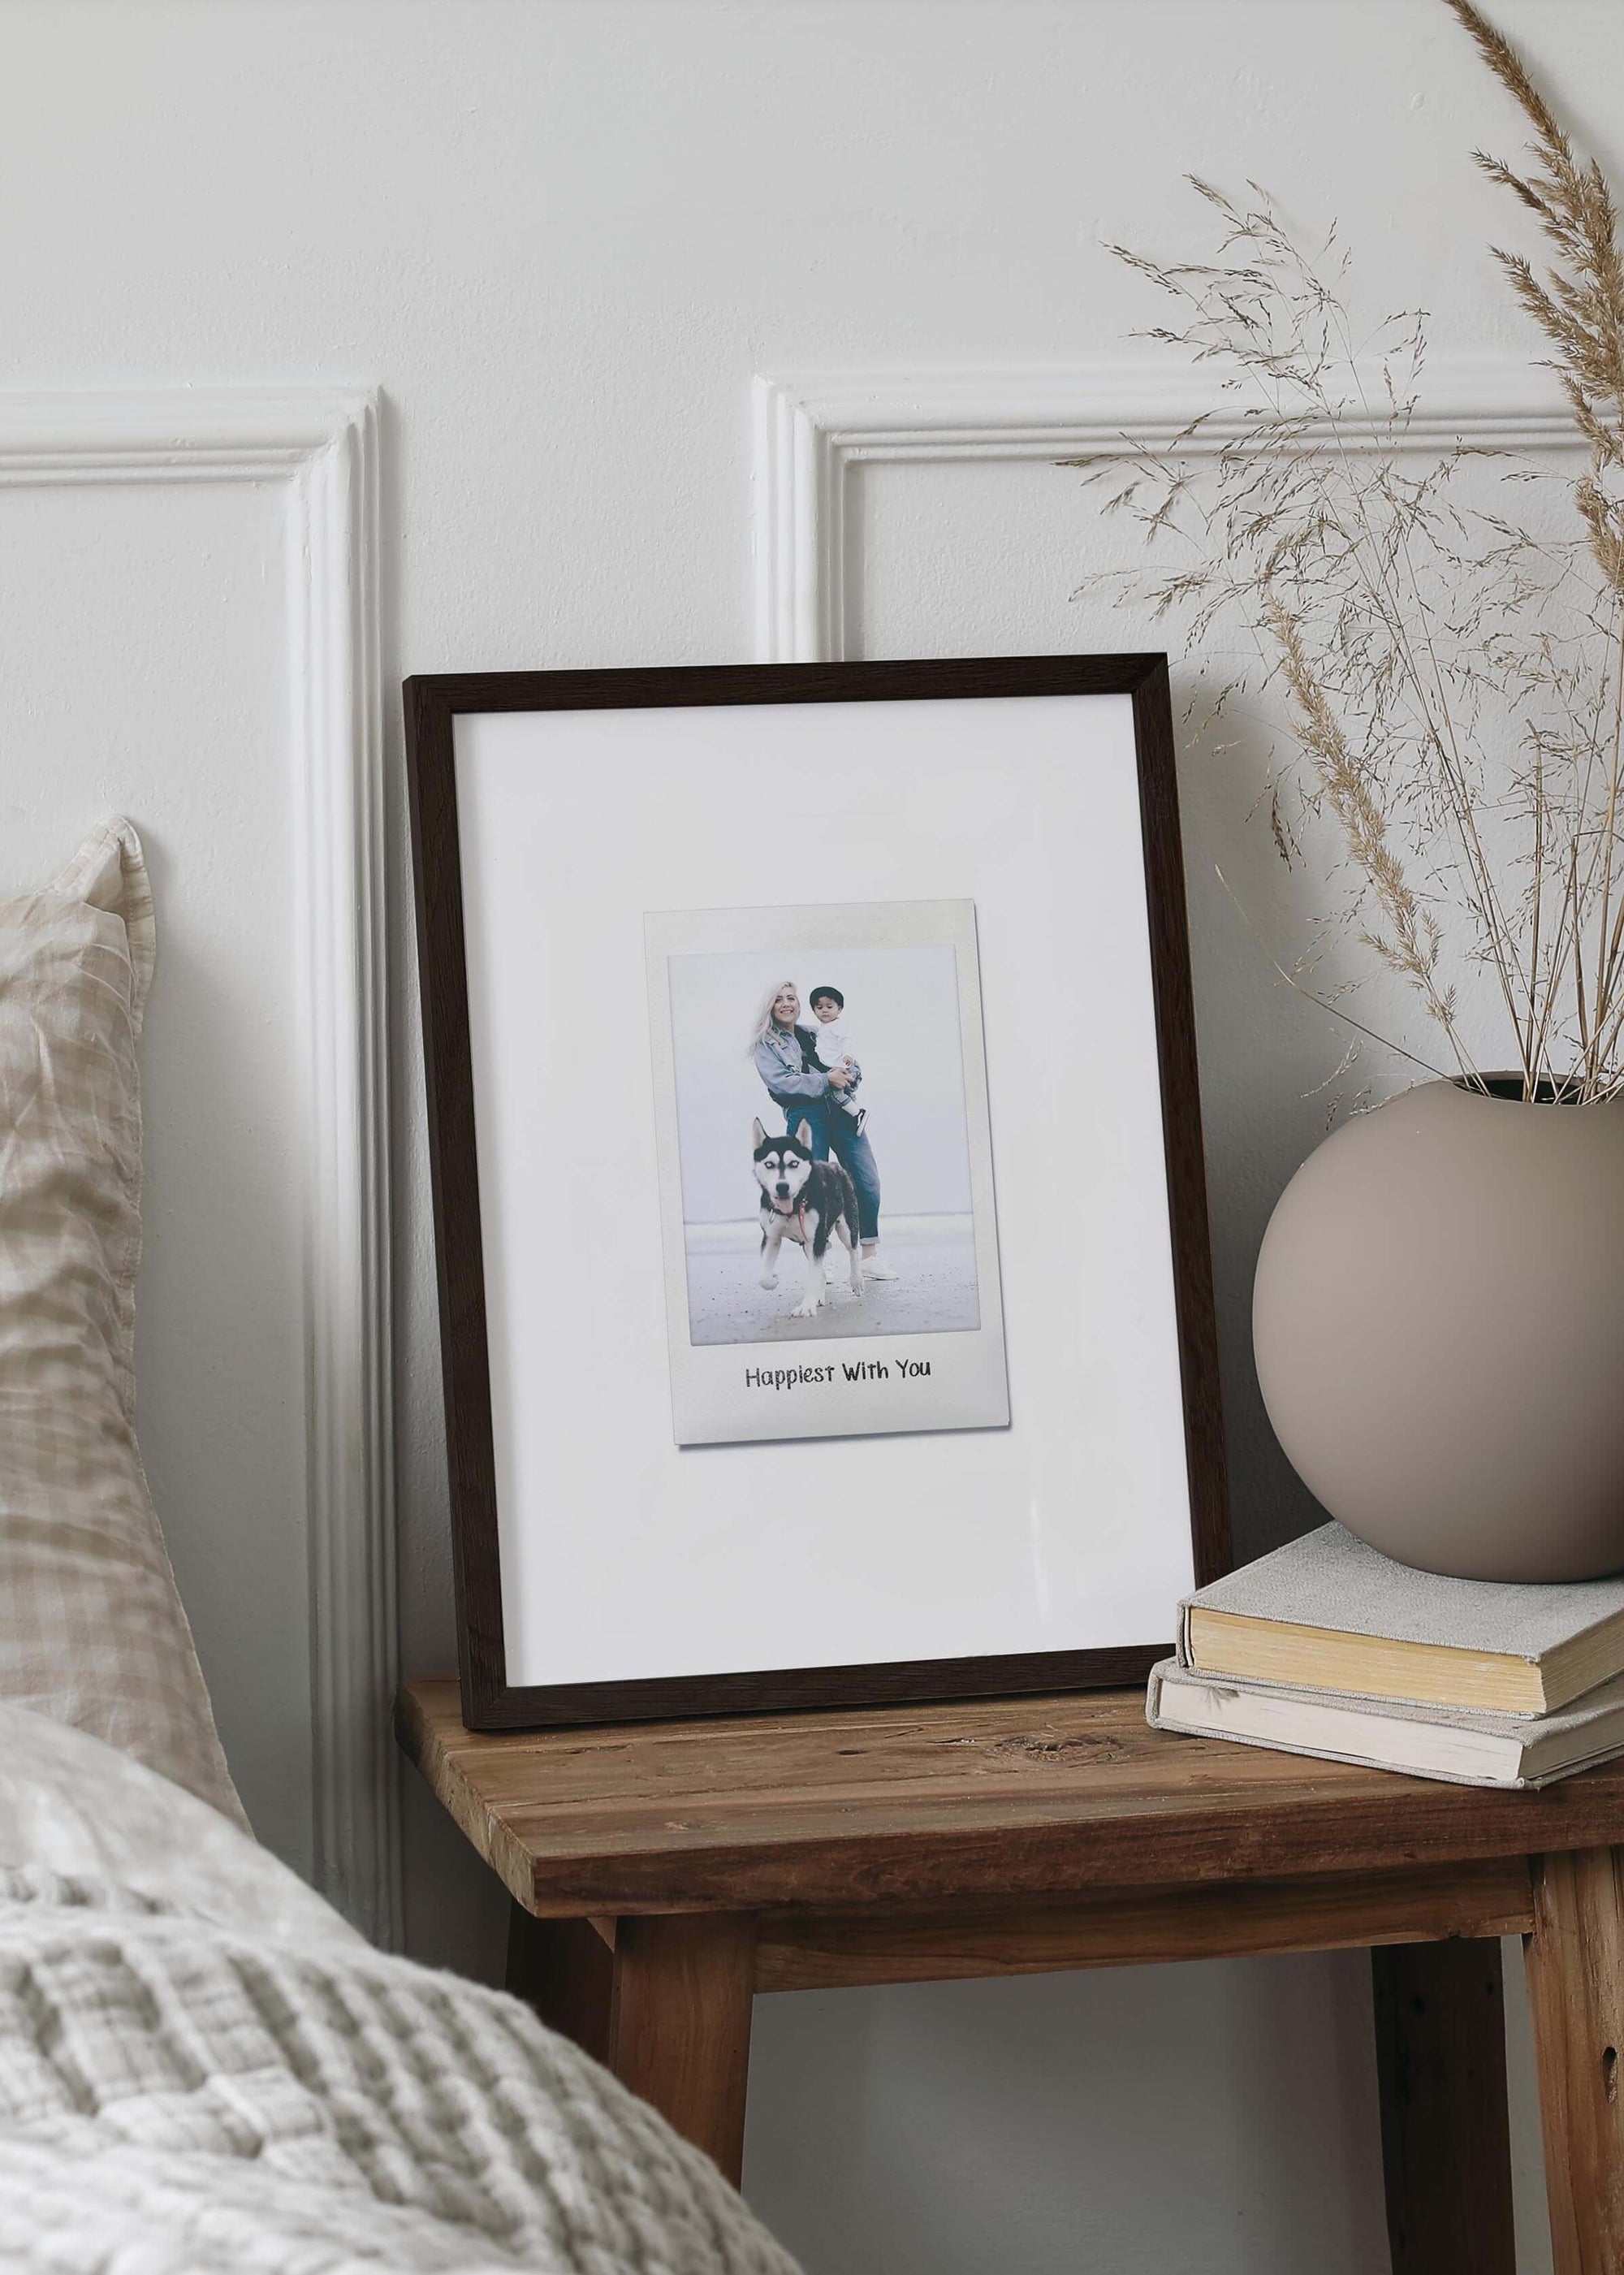 Personalized photo gift of a woman with her child and dog in a walnut frame in the style of a nostalgic instant film custom polaroid photo with frame on a small bedside table. The custom caption reads "Happiest with you".